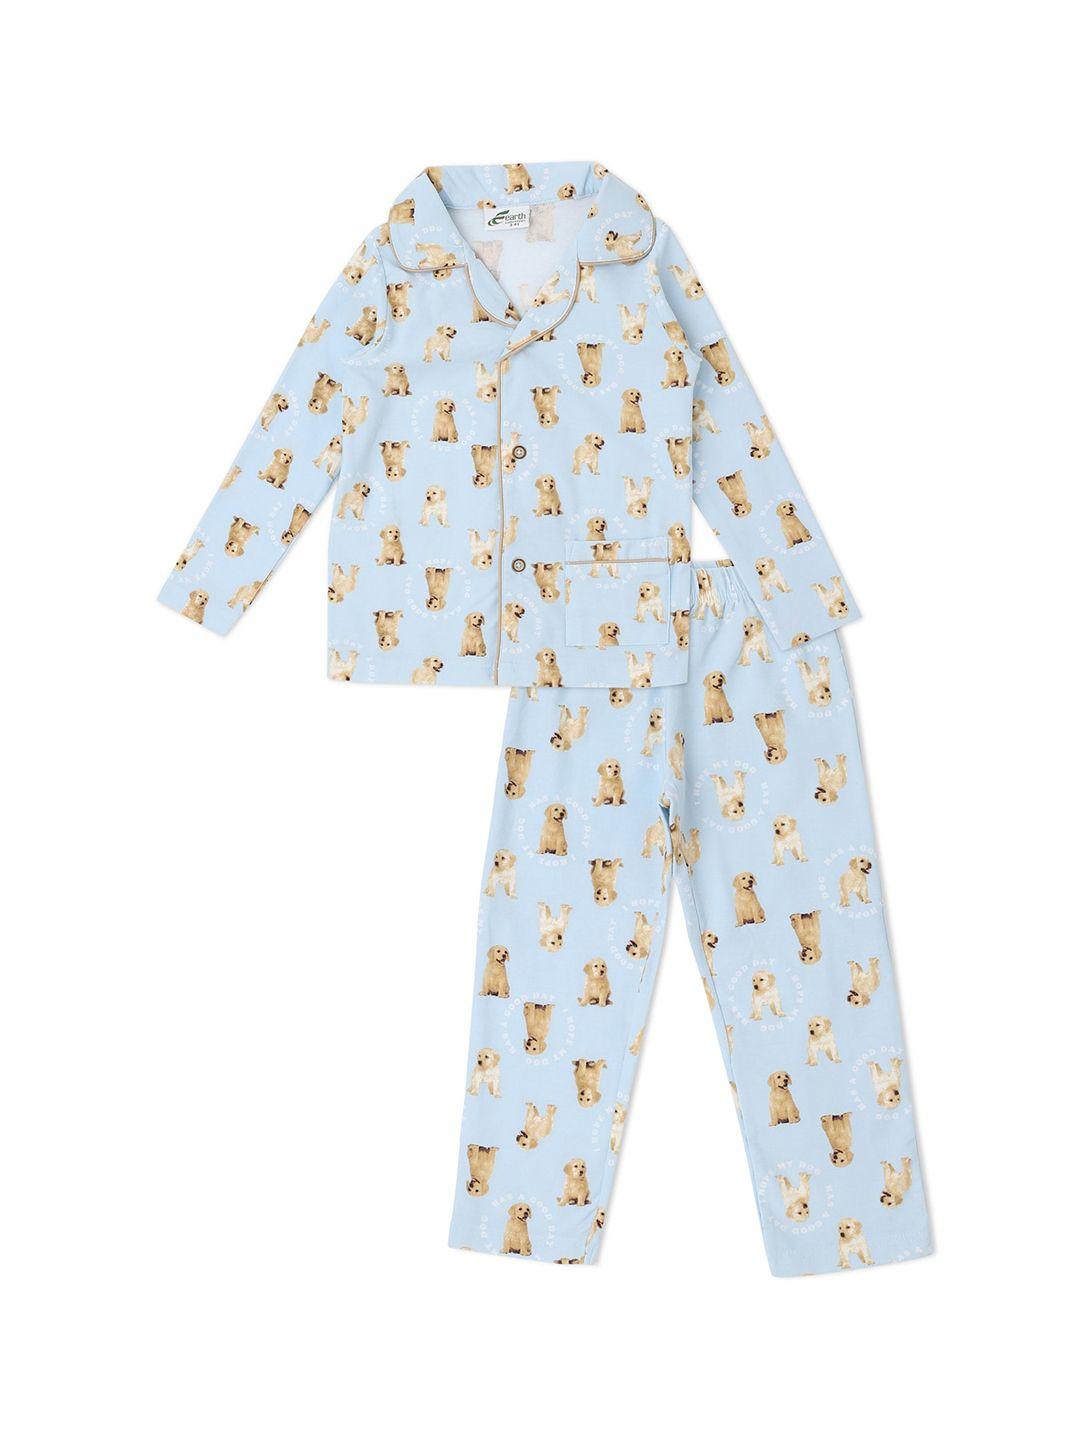 earth conscious boys blue & beige printed pure cotton night suit